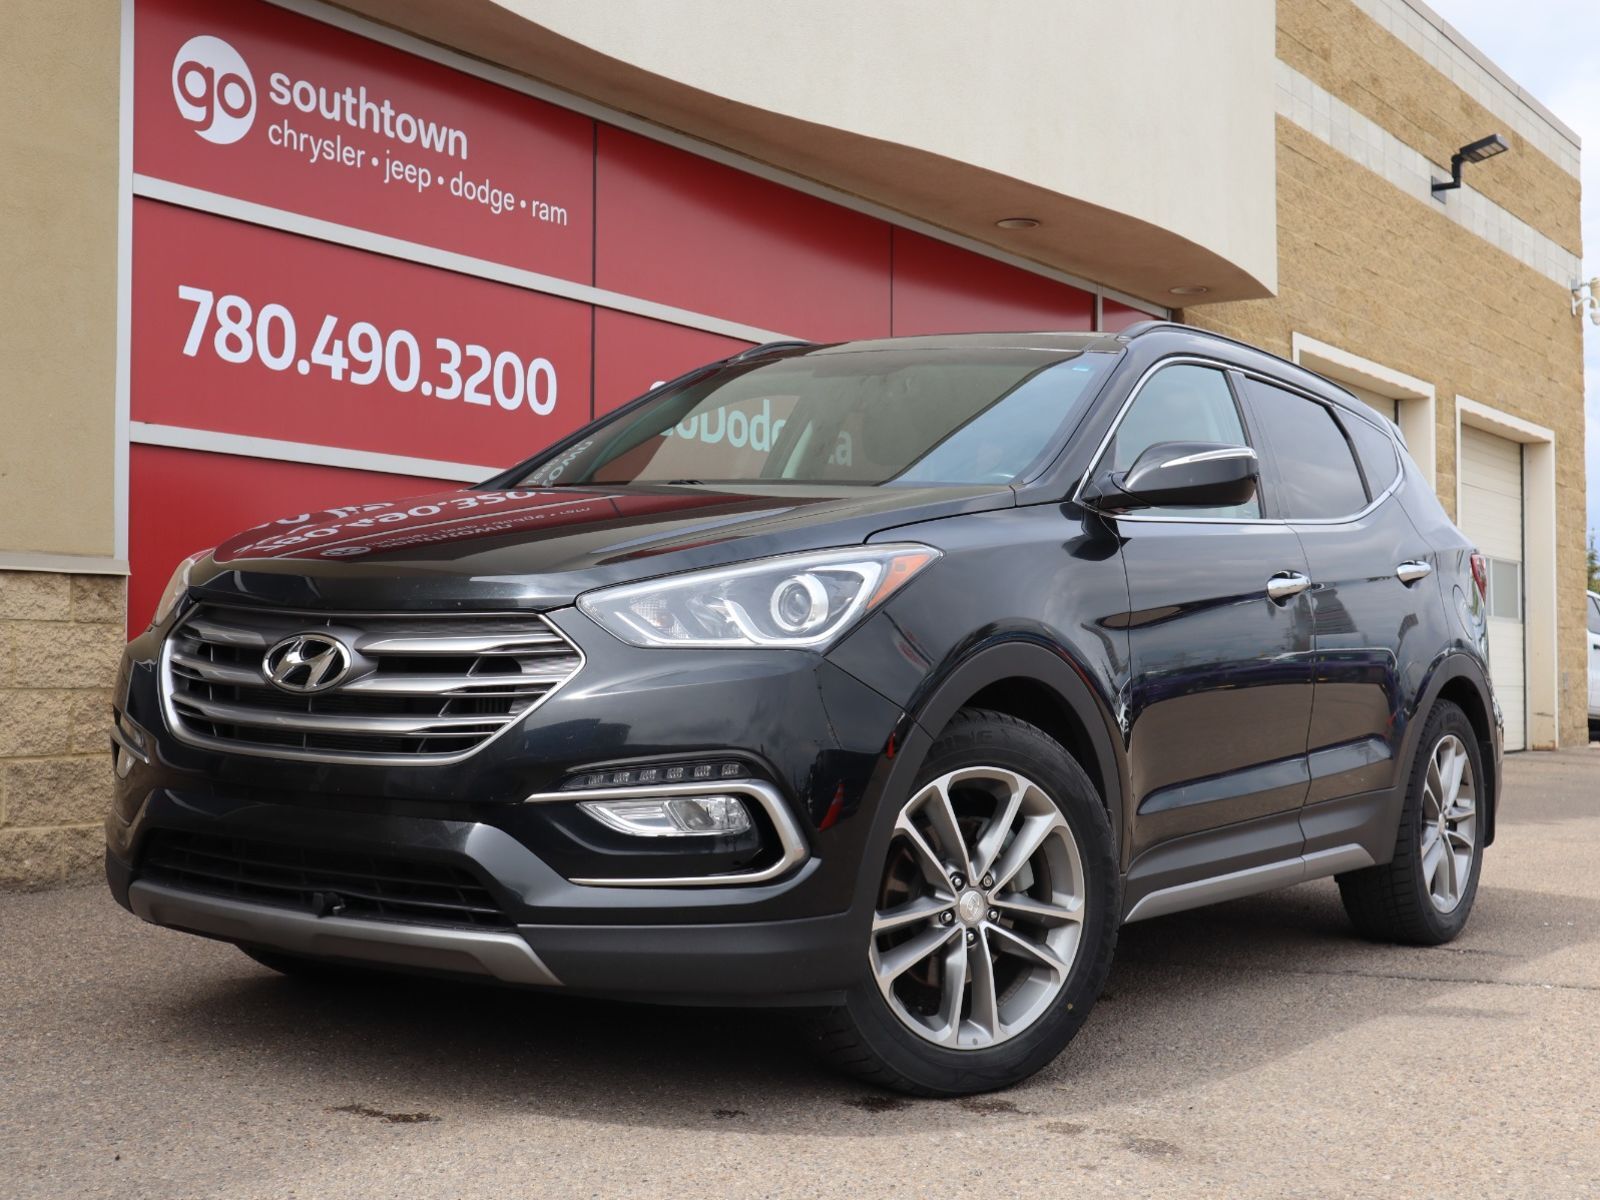 2017 Hyundai Santa Fe Sport SPORT LIMITED IN BLACK EQUIPPED WITH A 240HP 2.0L 